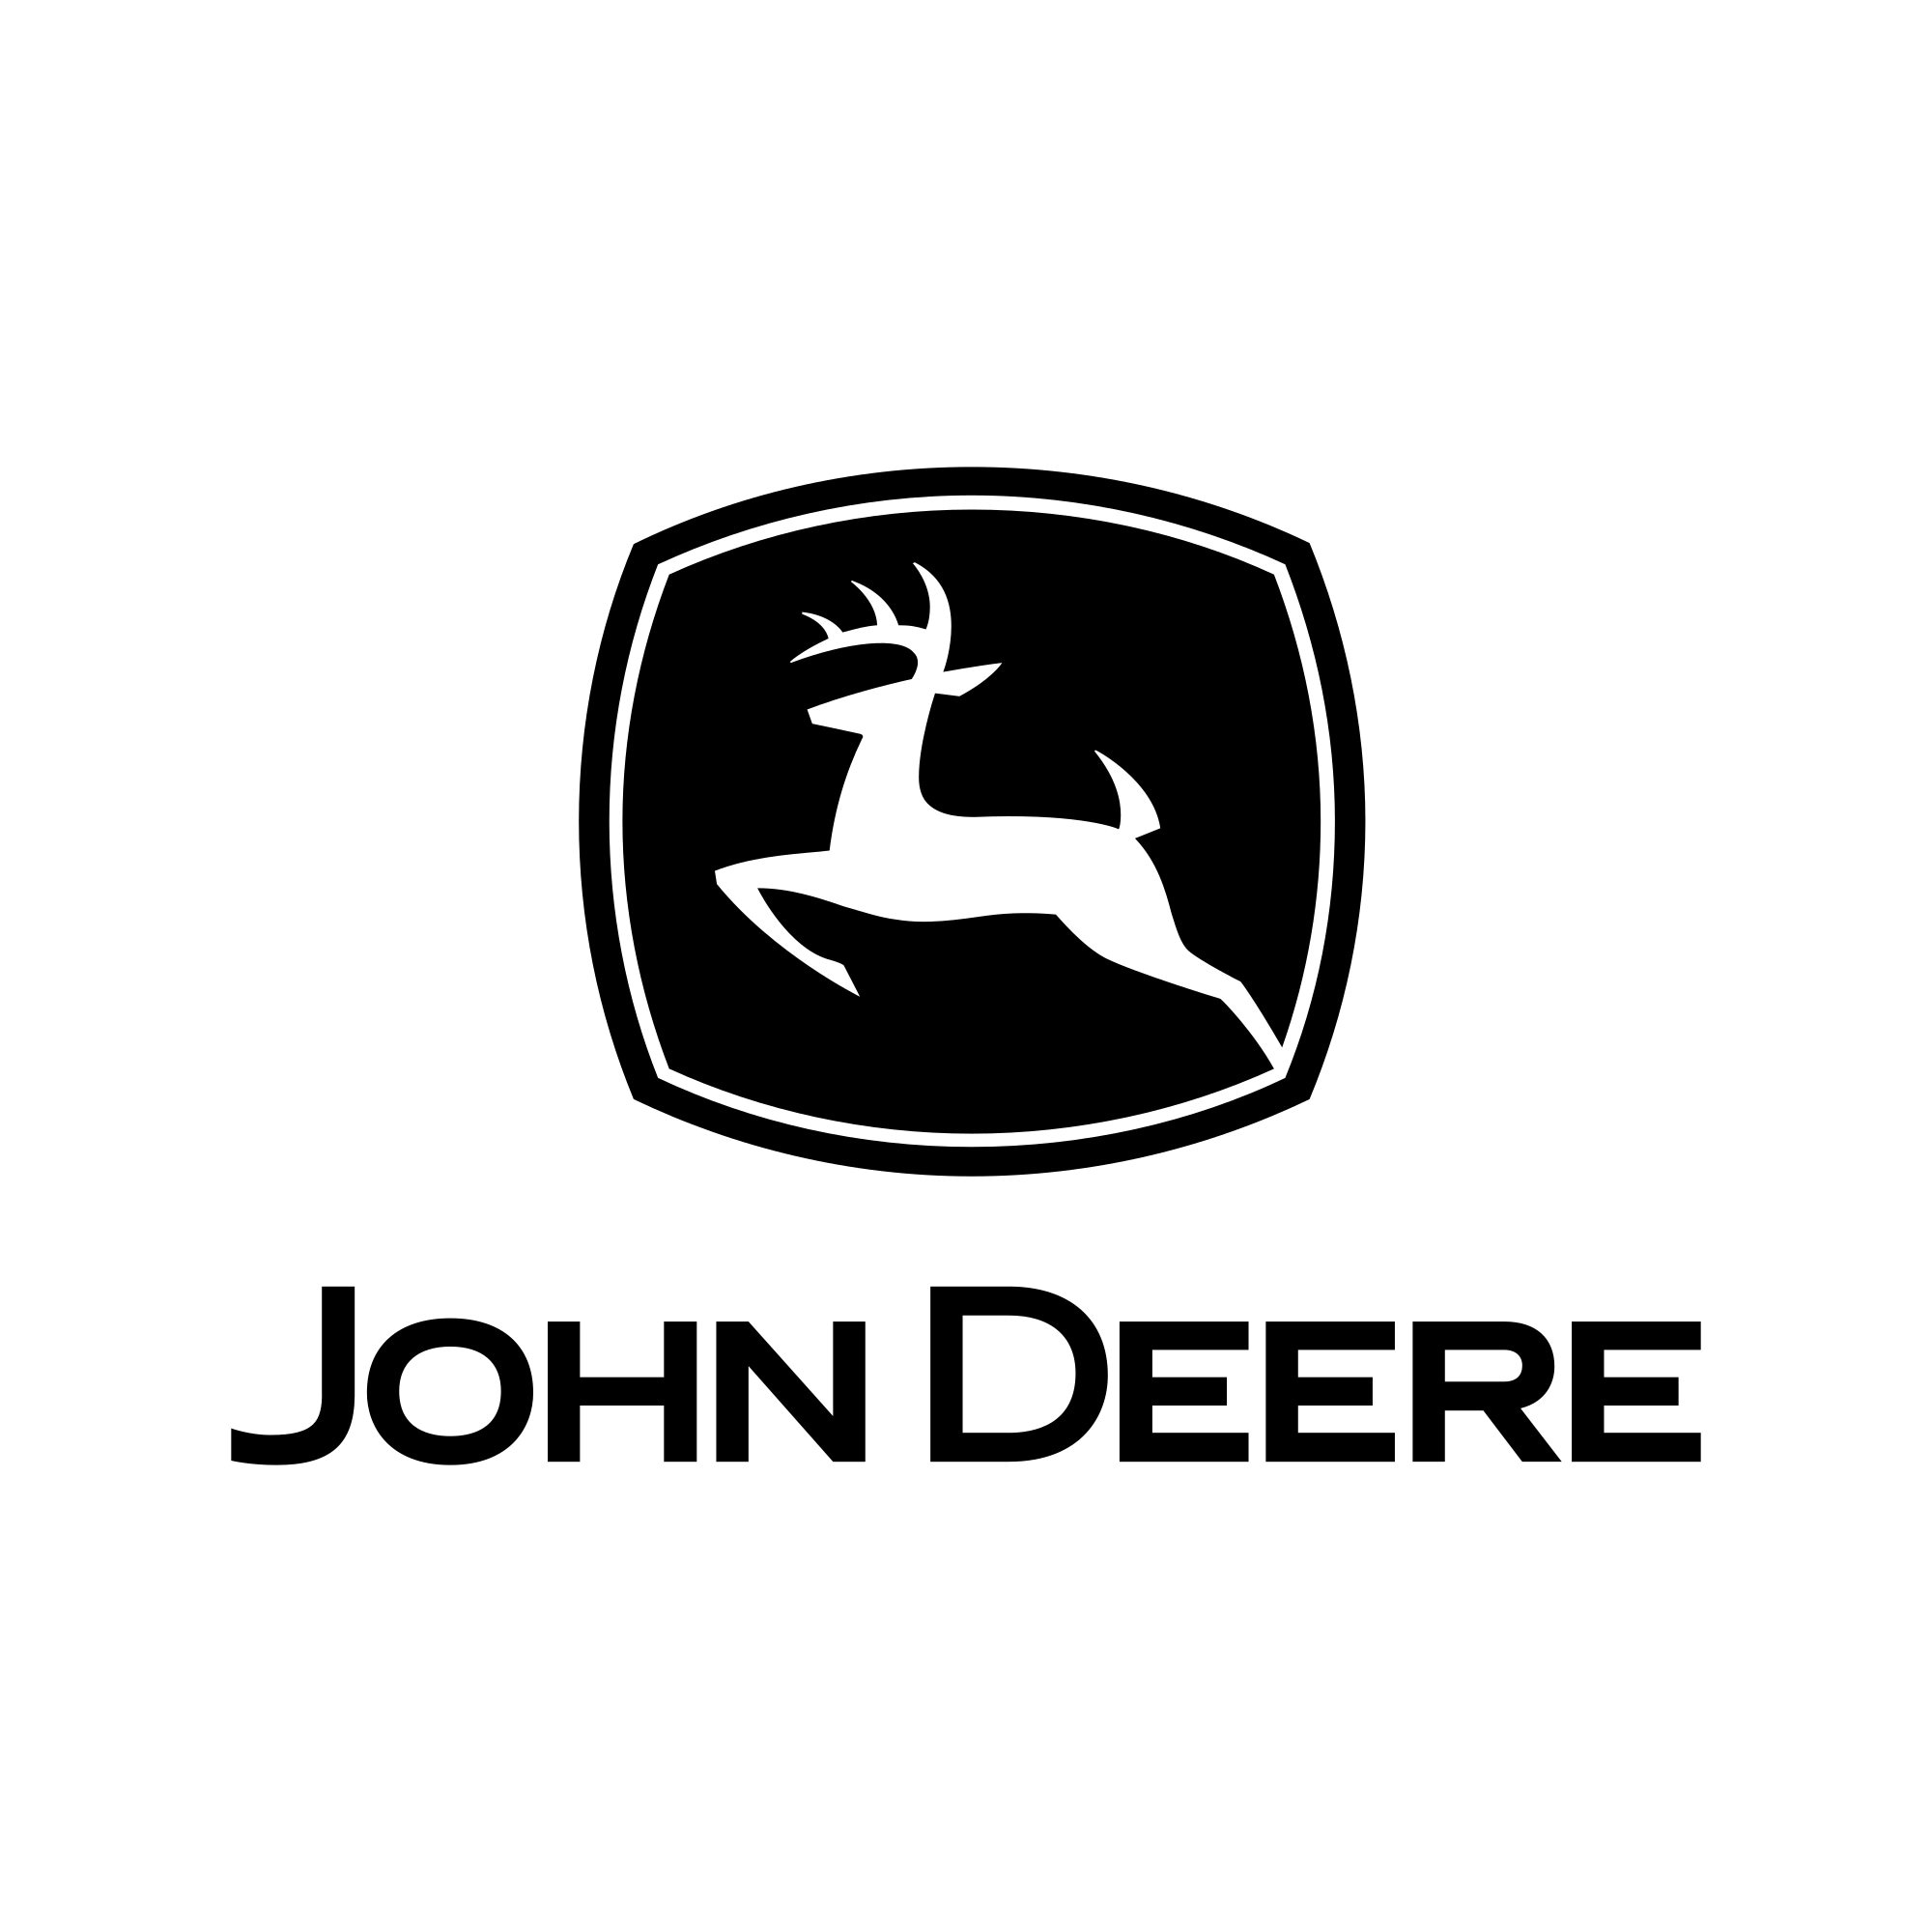 John Deere logo image in SVG, AI and PNG